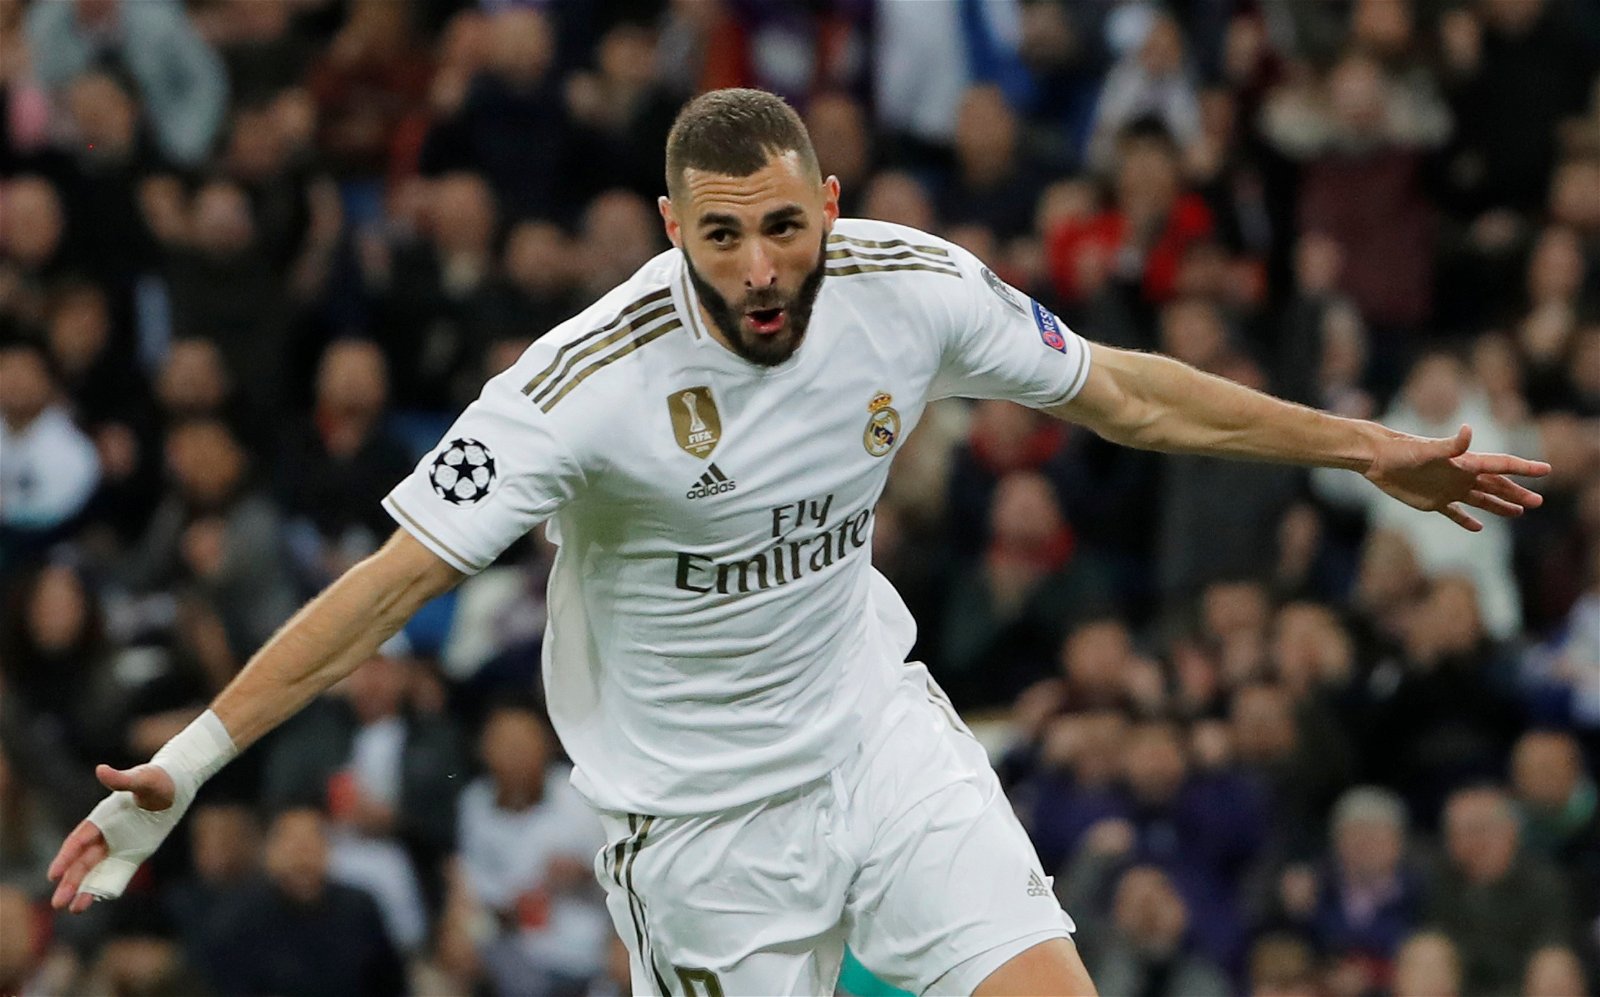 Benzema Makes History - Joins Puskas As 5th Highest Goalscorer For Real Madrid